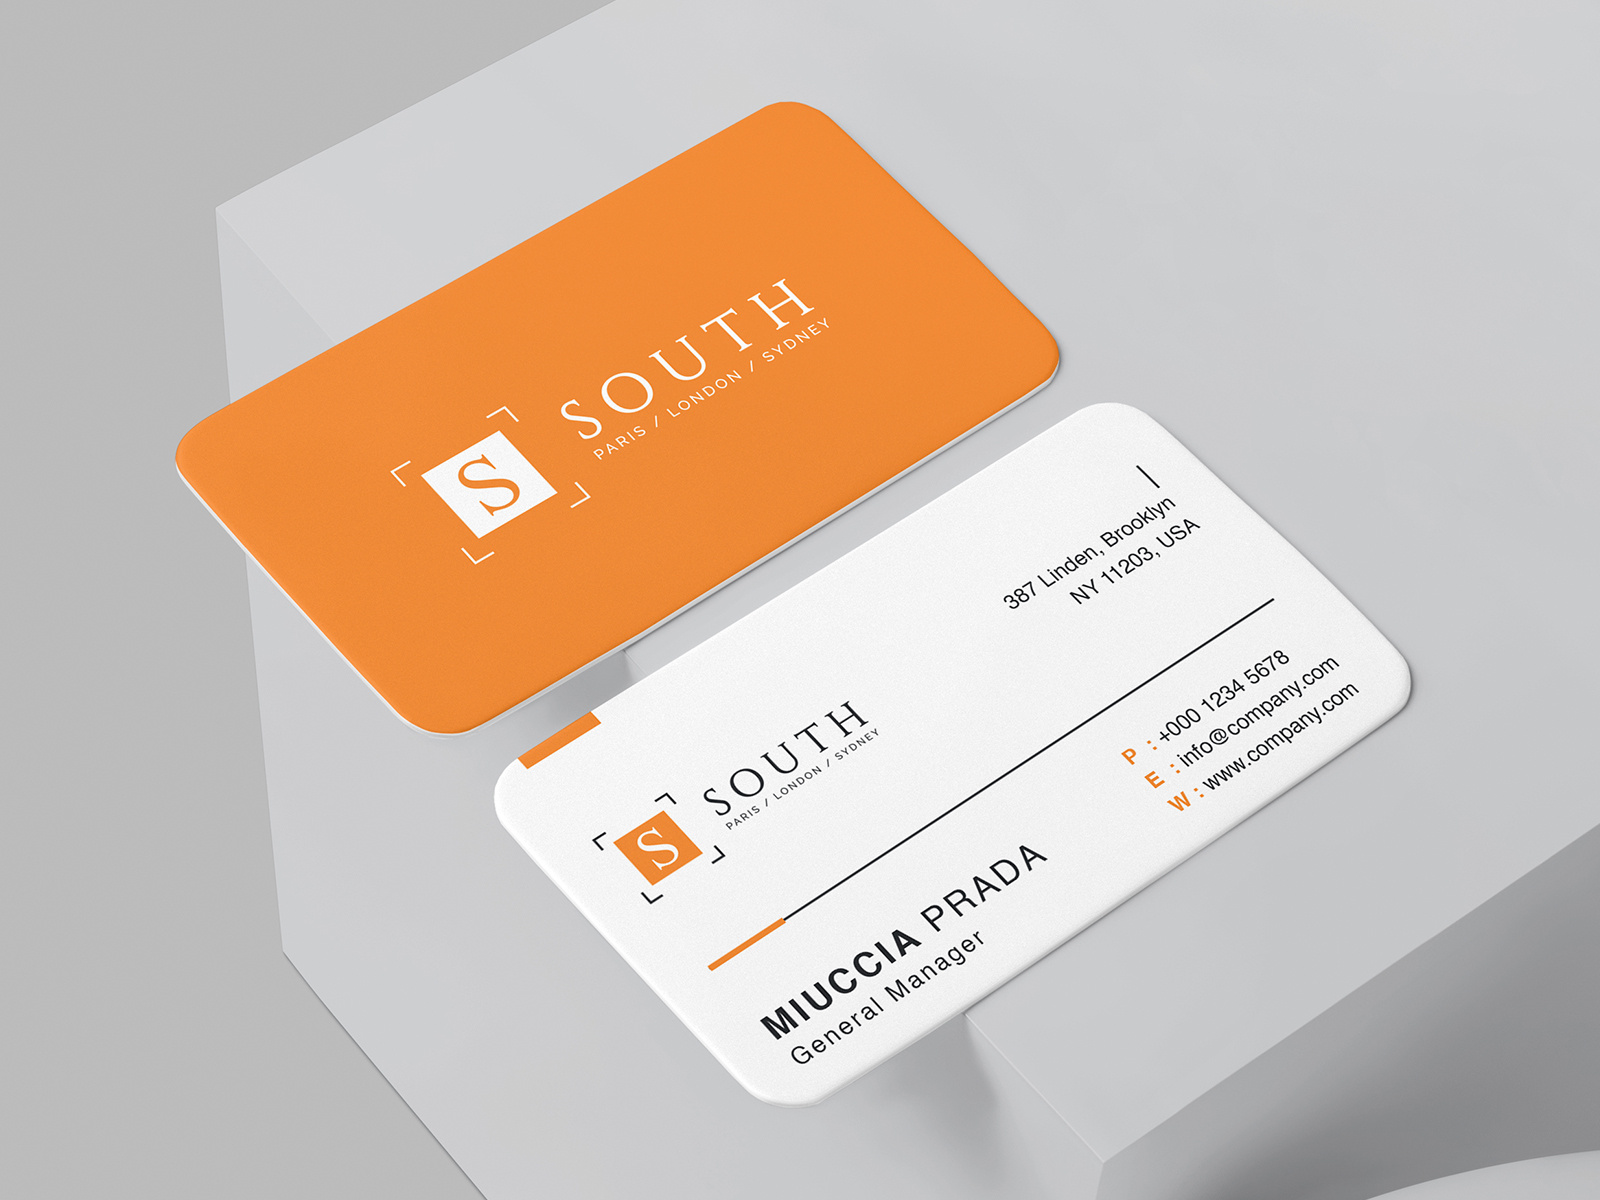 Design Business Cards with Online Templates by MD ABU BAKAR on Dribbble